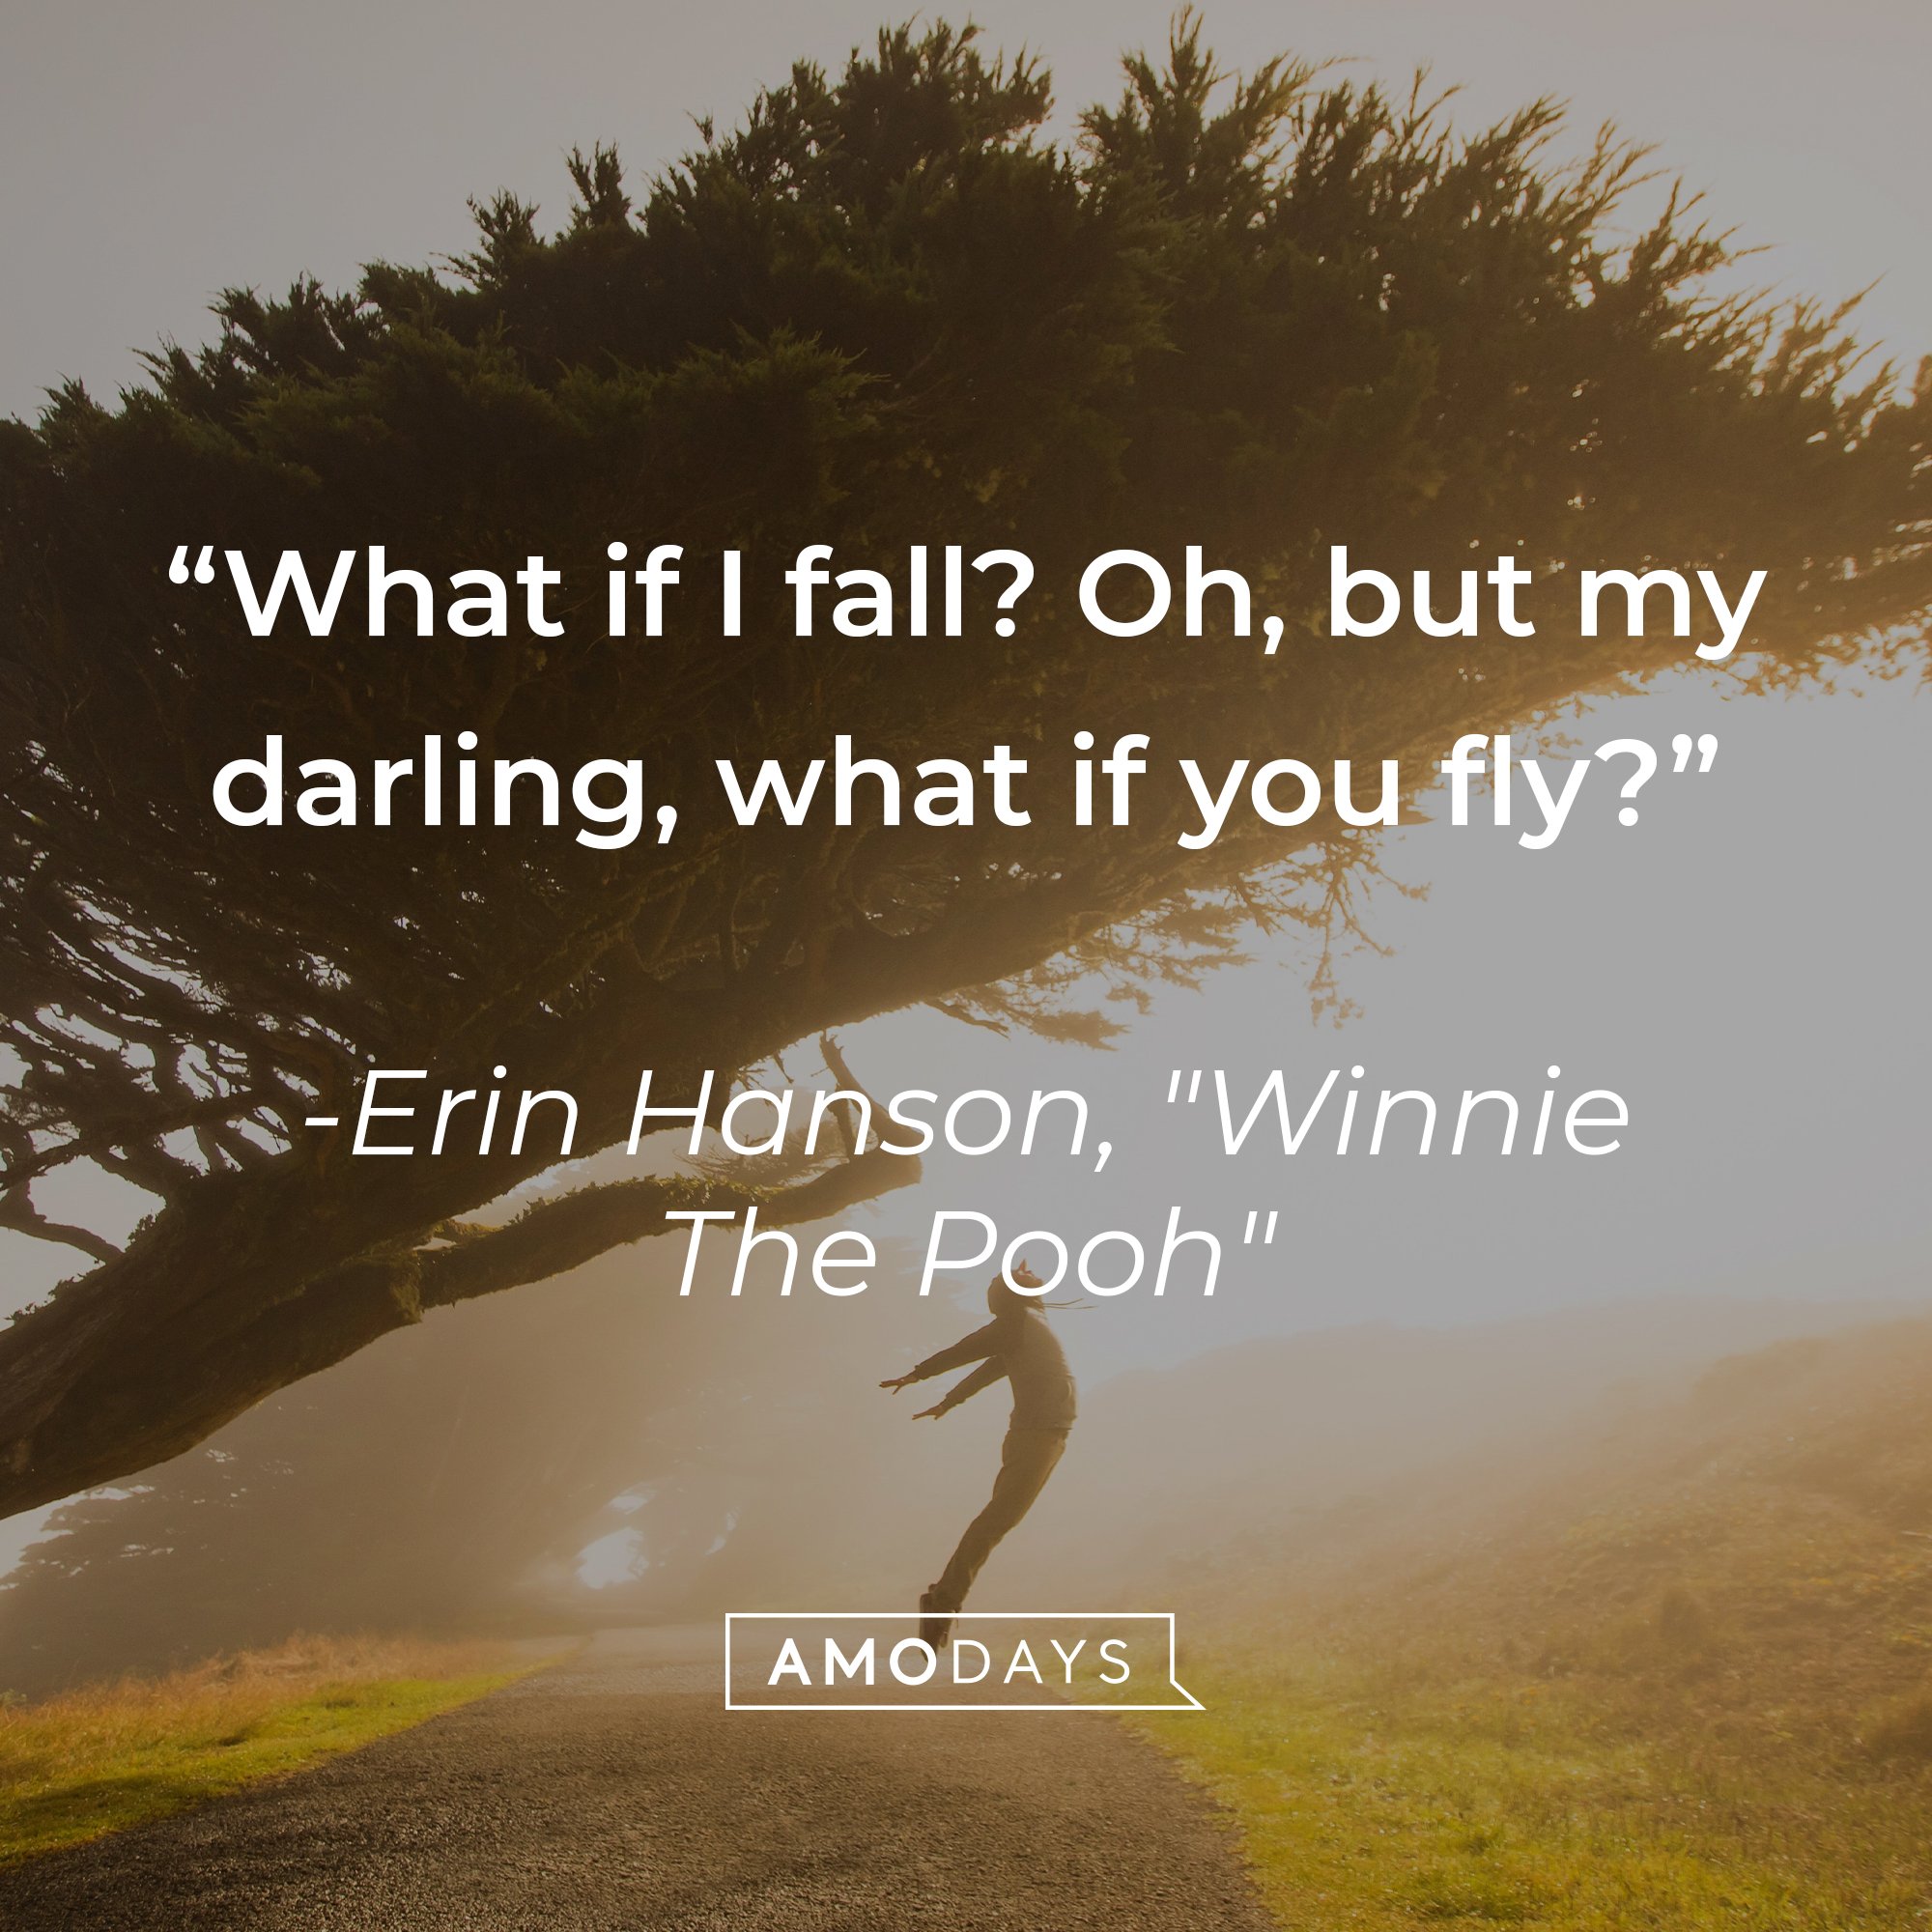 Erin Hanson's "Winnie the Pooh" quote: "What if I fall? Oh, but my darling, what if you fly?" | Image: AmoDays